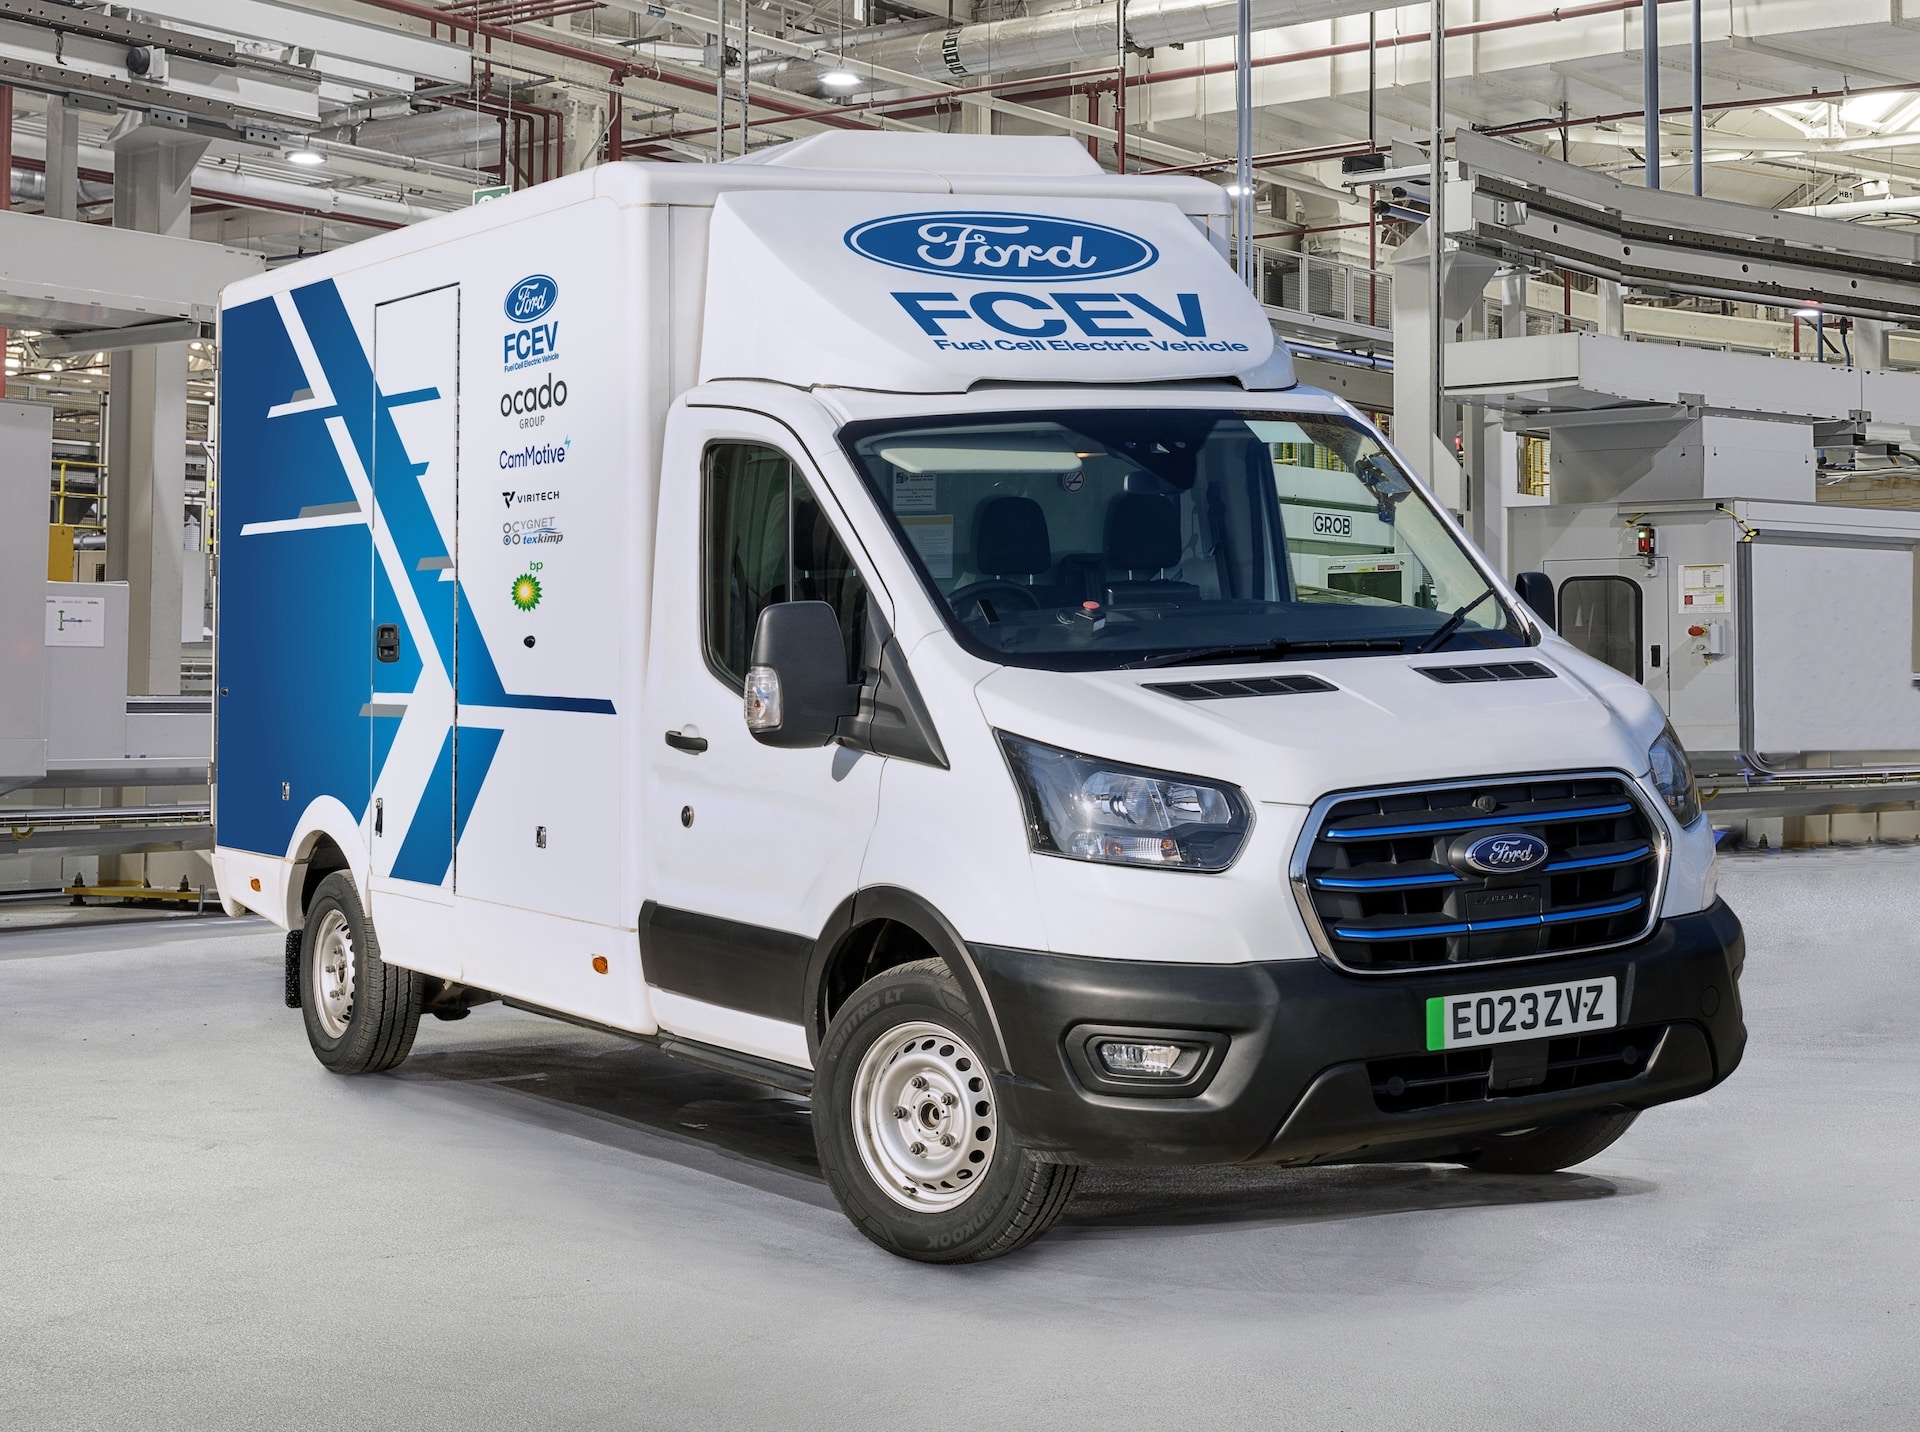 Ford Explores Hydrogen Fuel Cell Technology for E-Transit